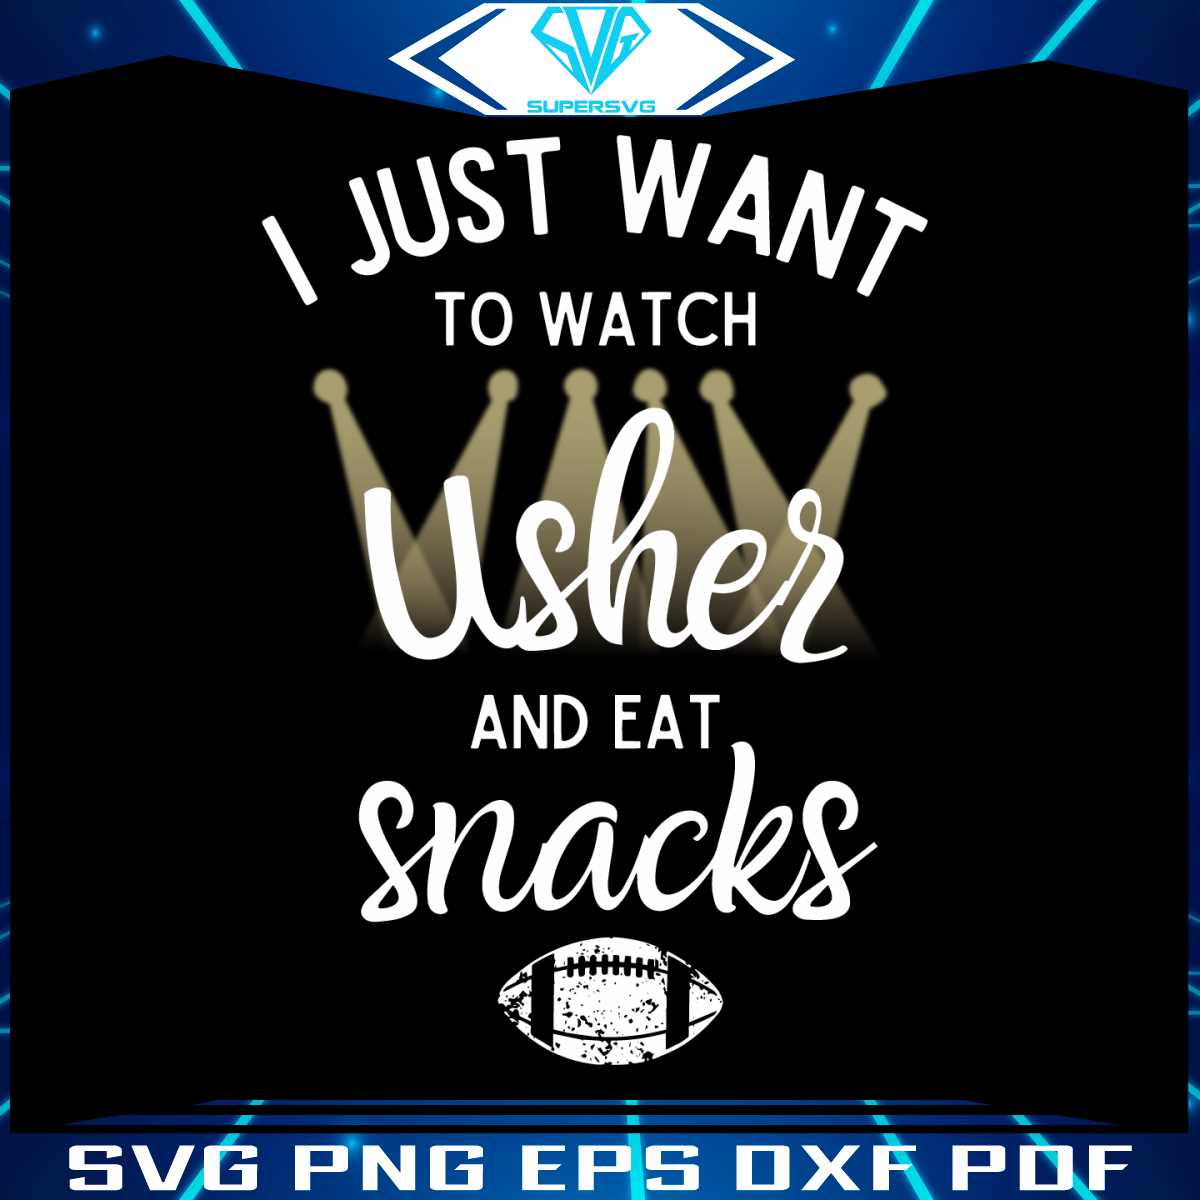 i-just-want-to-watch-usher-and-eat-snacks-png